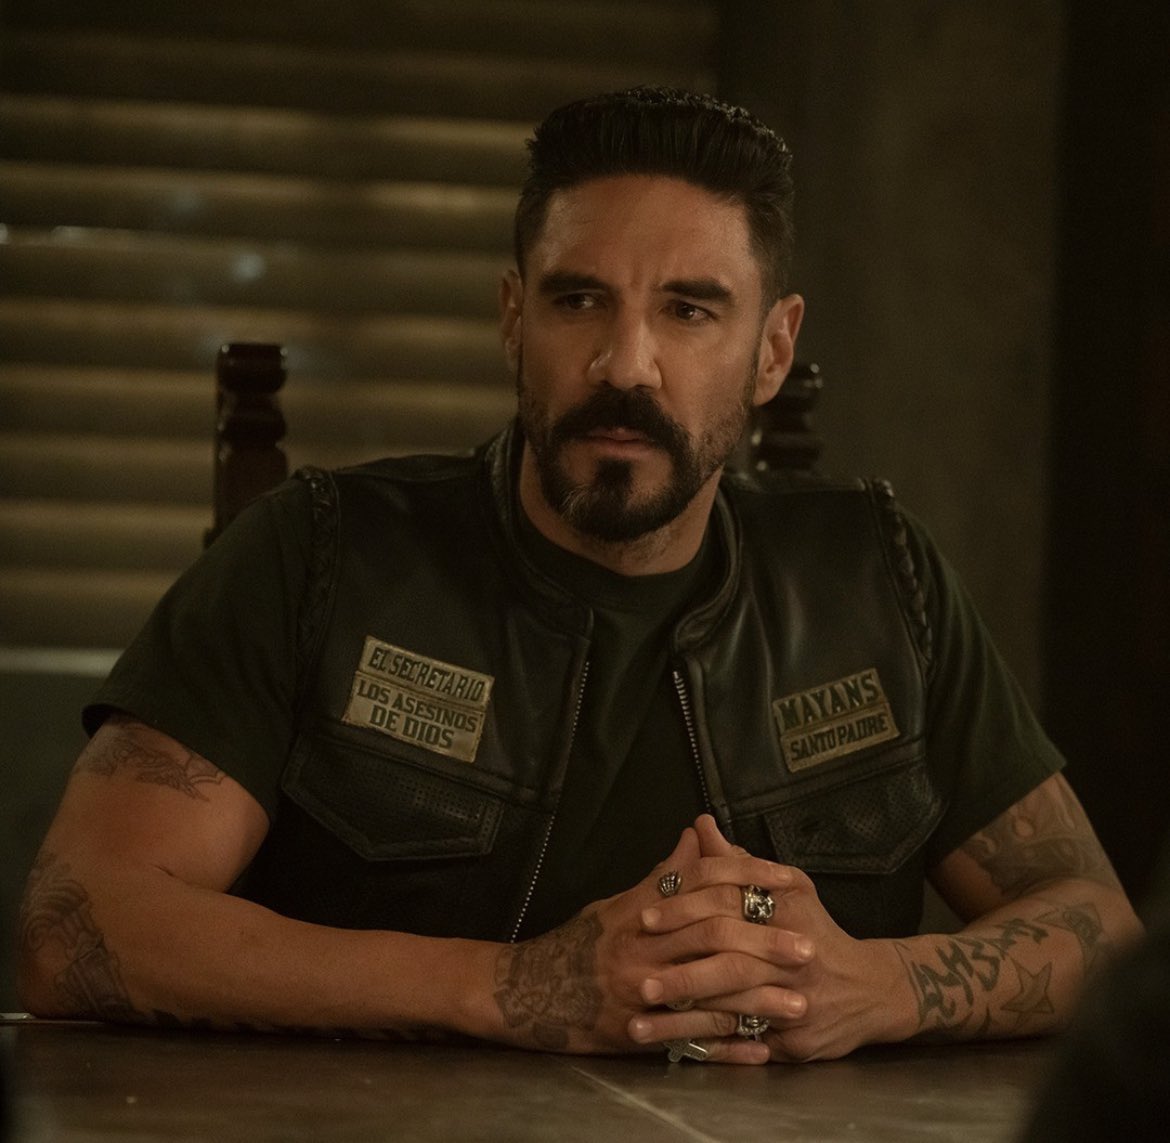 His hair was combed back like a movie star😂 #MayansMC #MayansFX